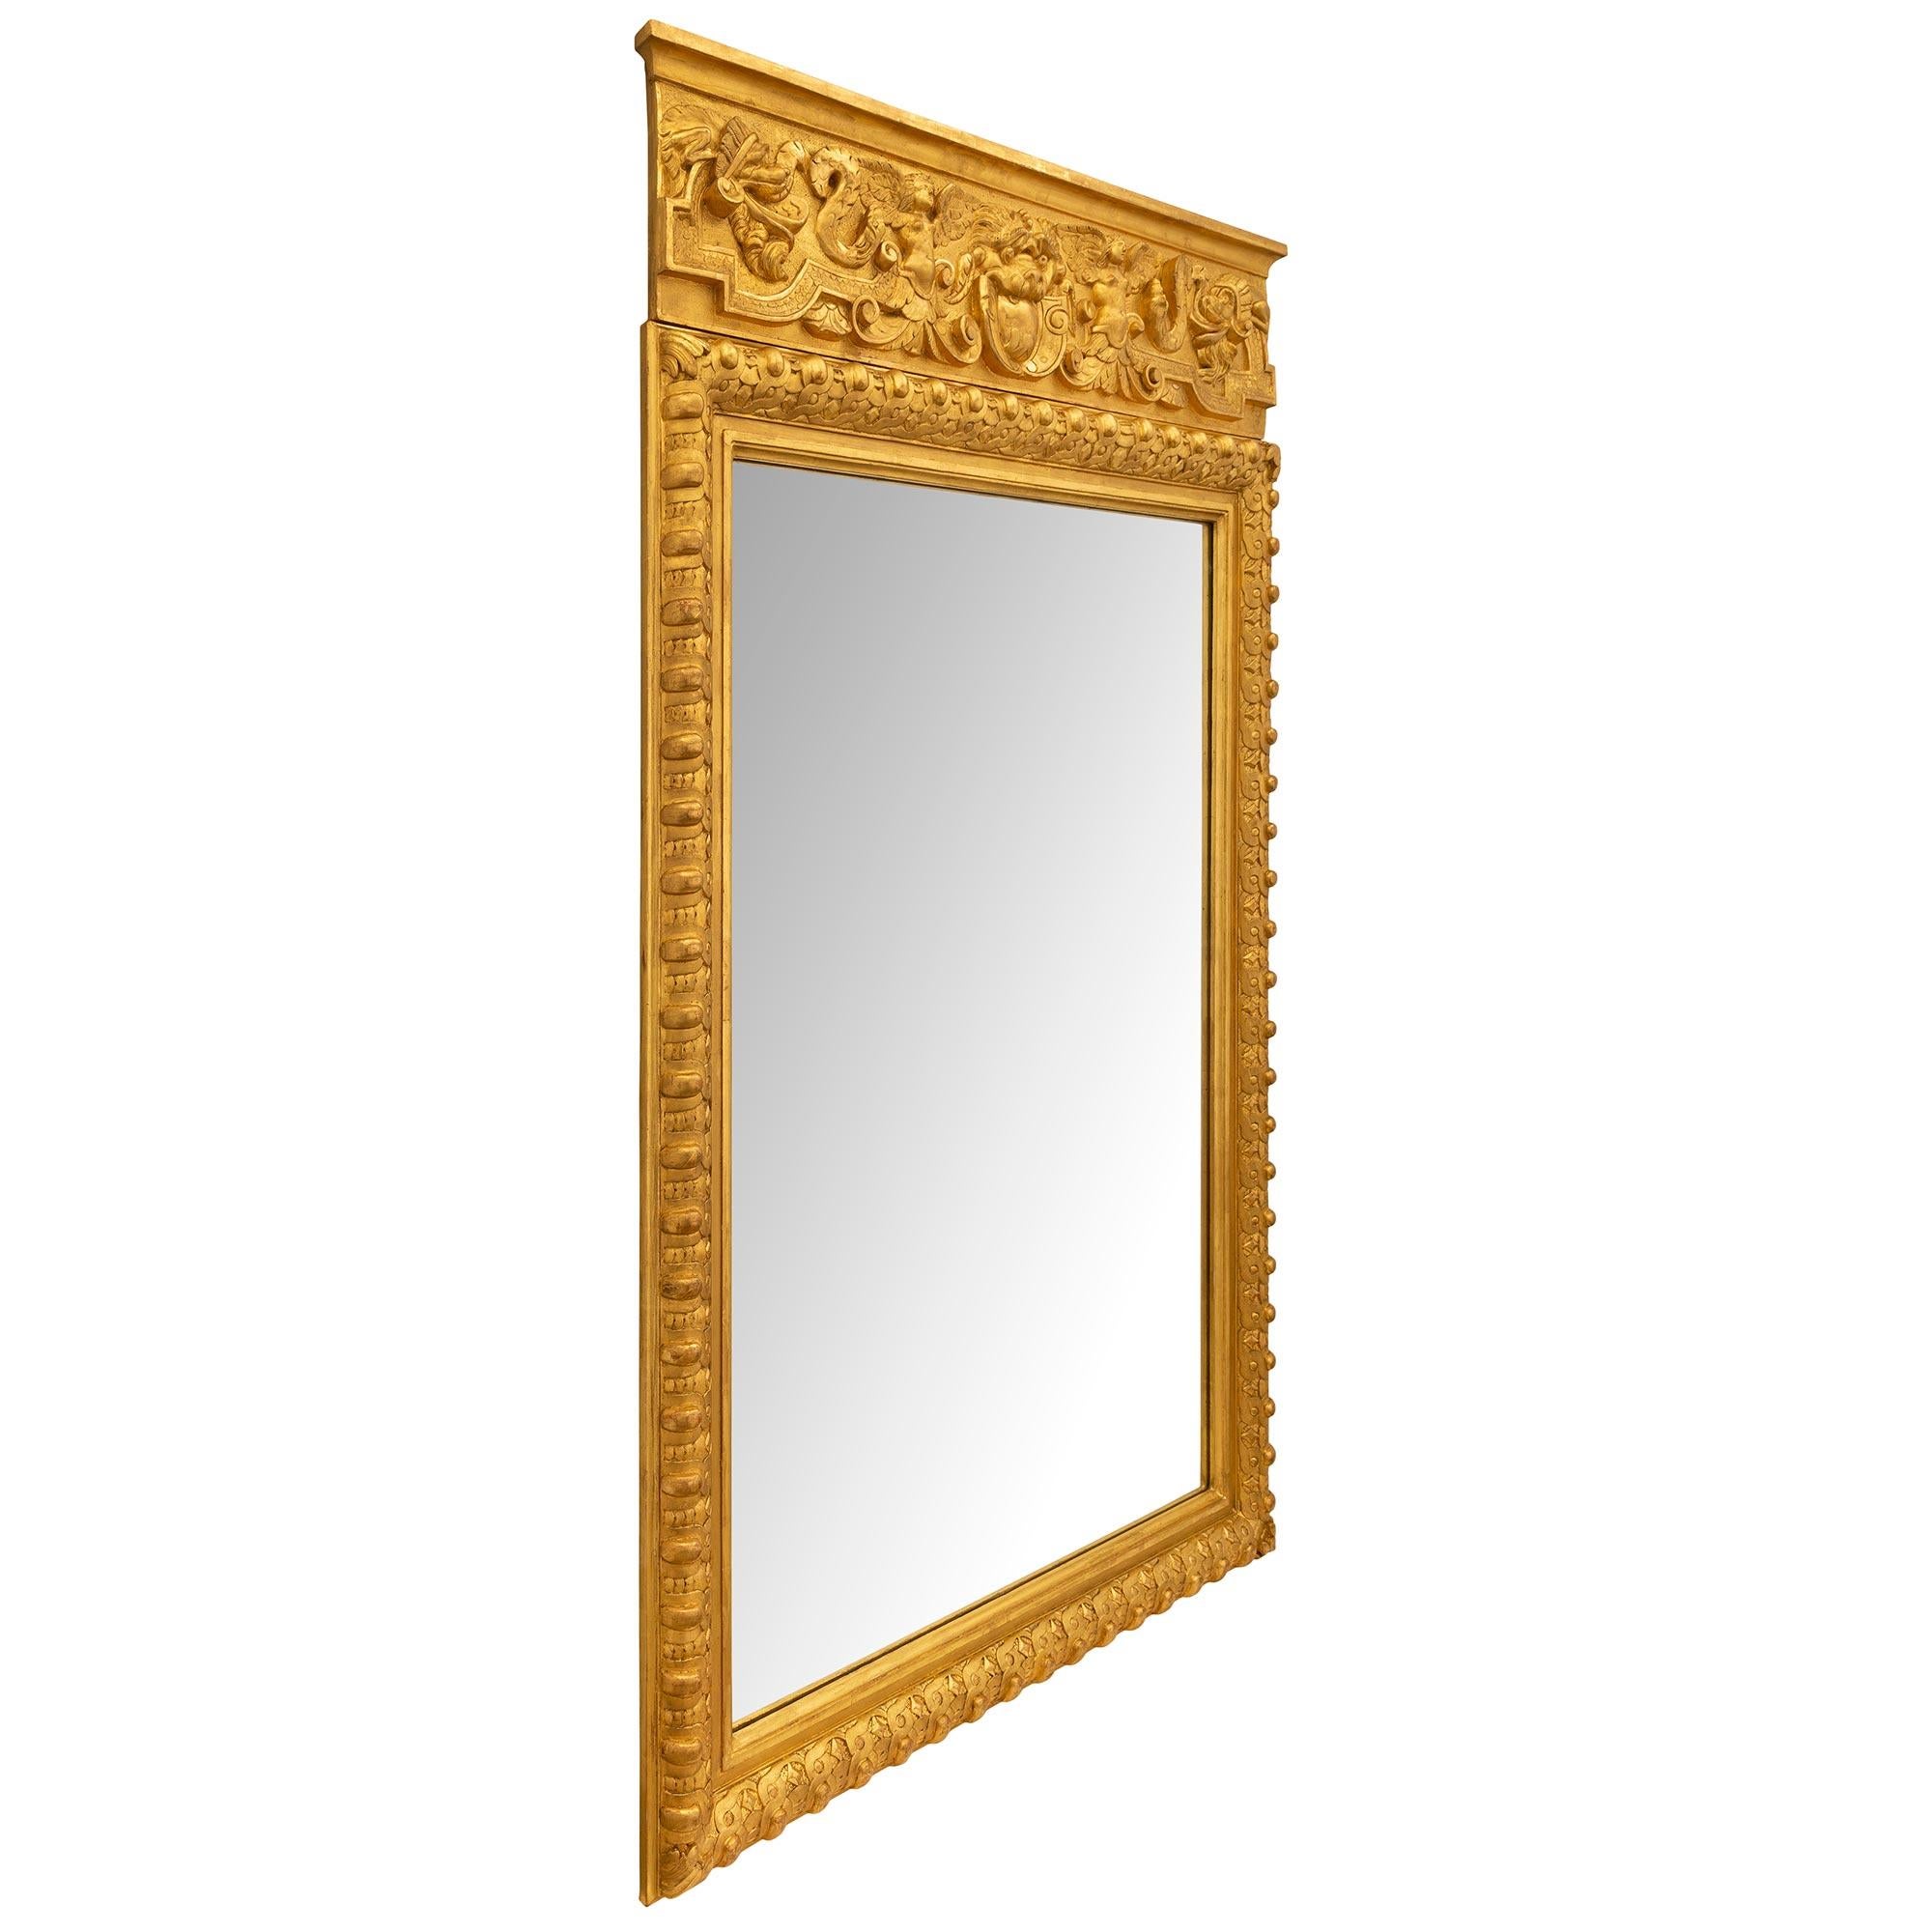 A striking Italian 19th century Neo-Classical st. giltwood mirror. The mirror retains its original mirror plate framed within a fine mottled border and exceptional wrap around border with most decorative Les Oves designs and beautiful interlocking